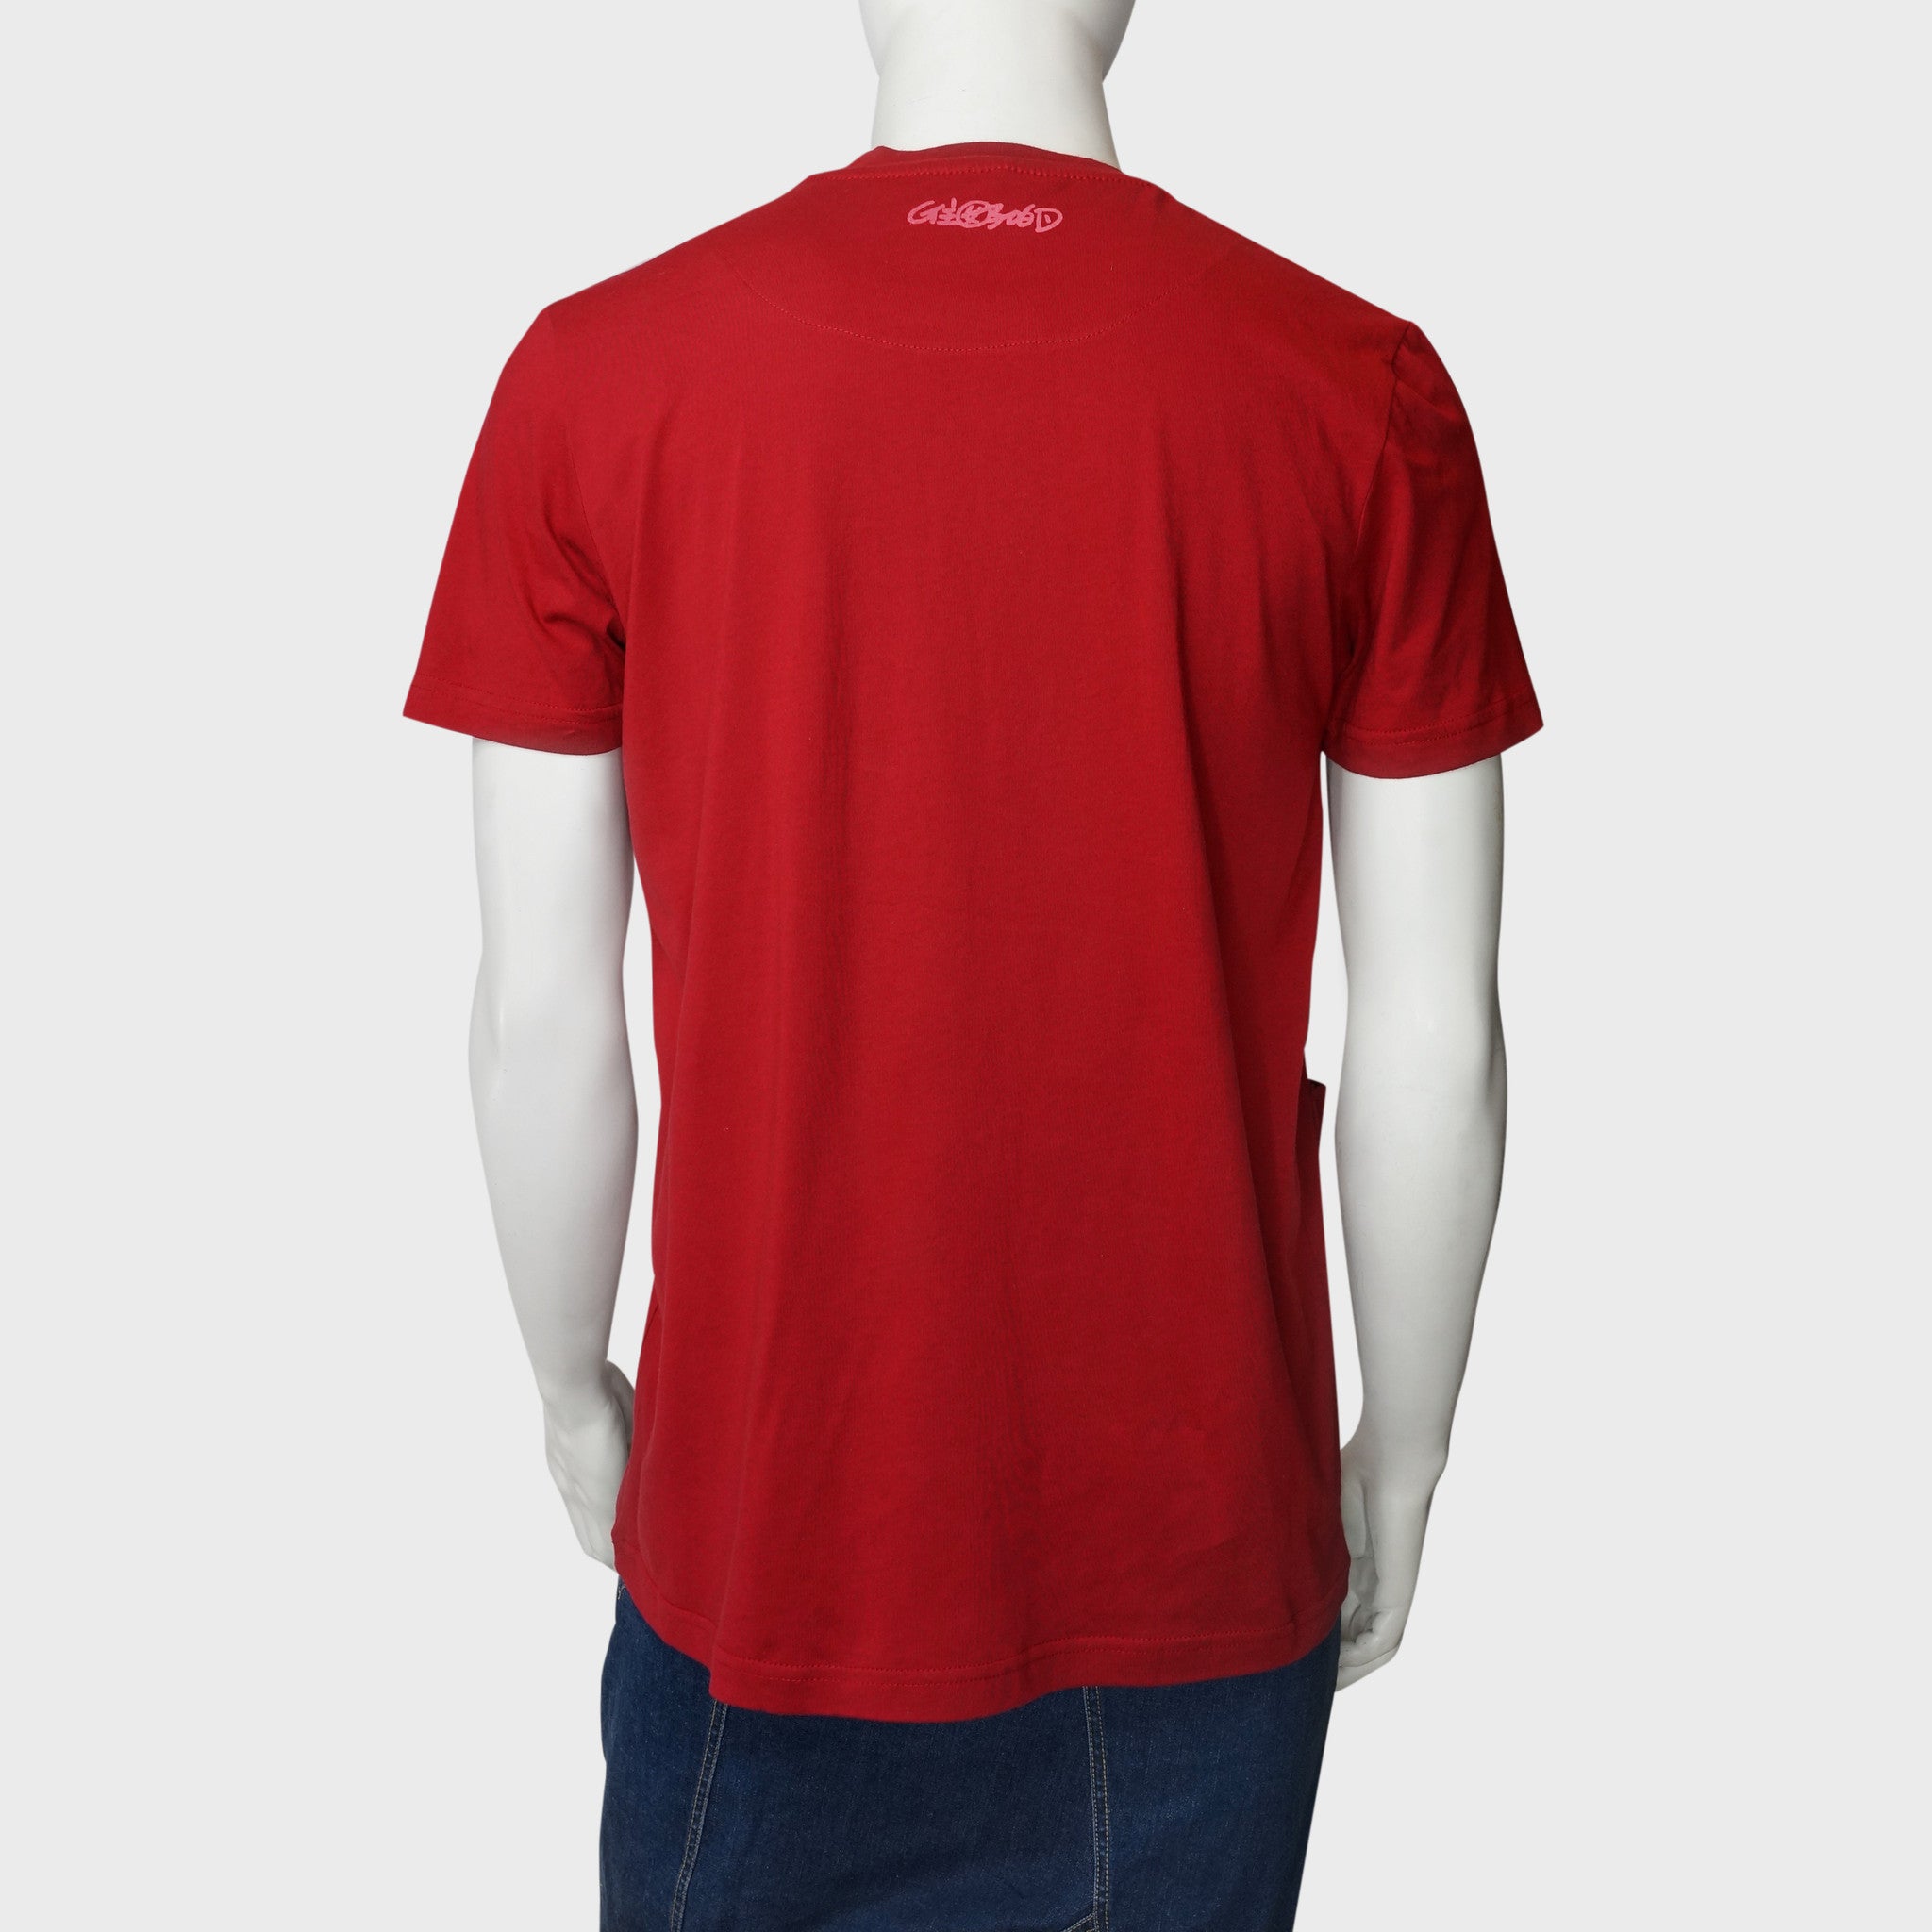 'Chinese Button' print tee (red), T-shirt, Goods of Desire, Goods of Desire